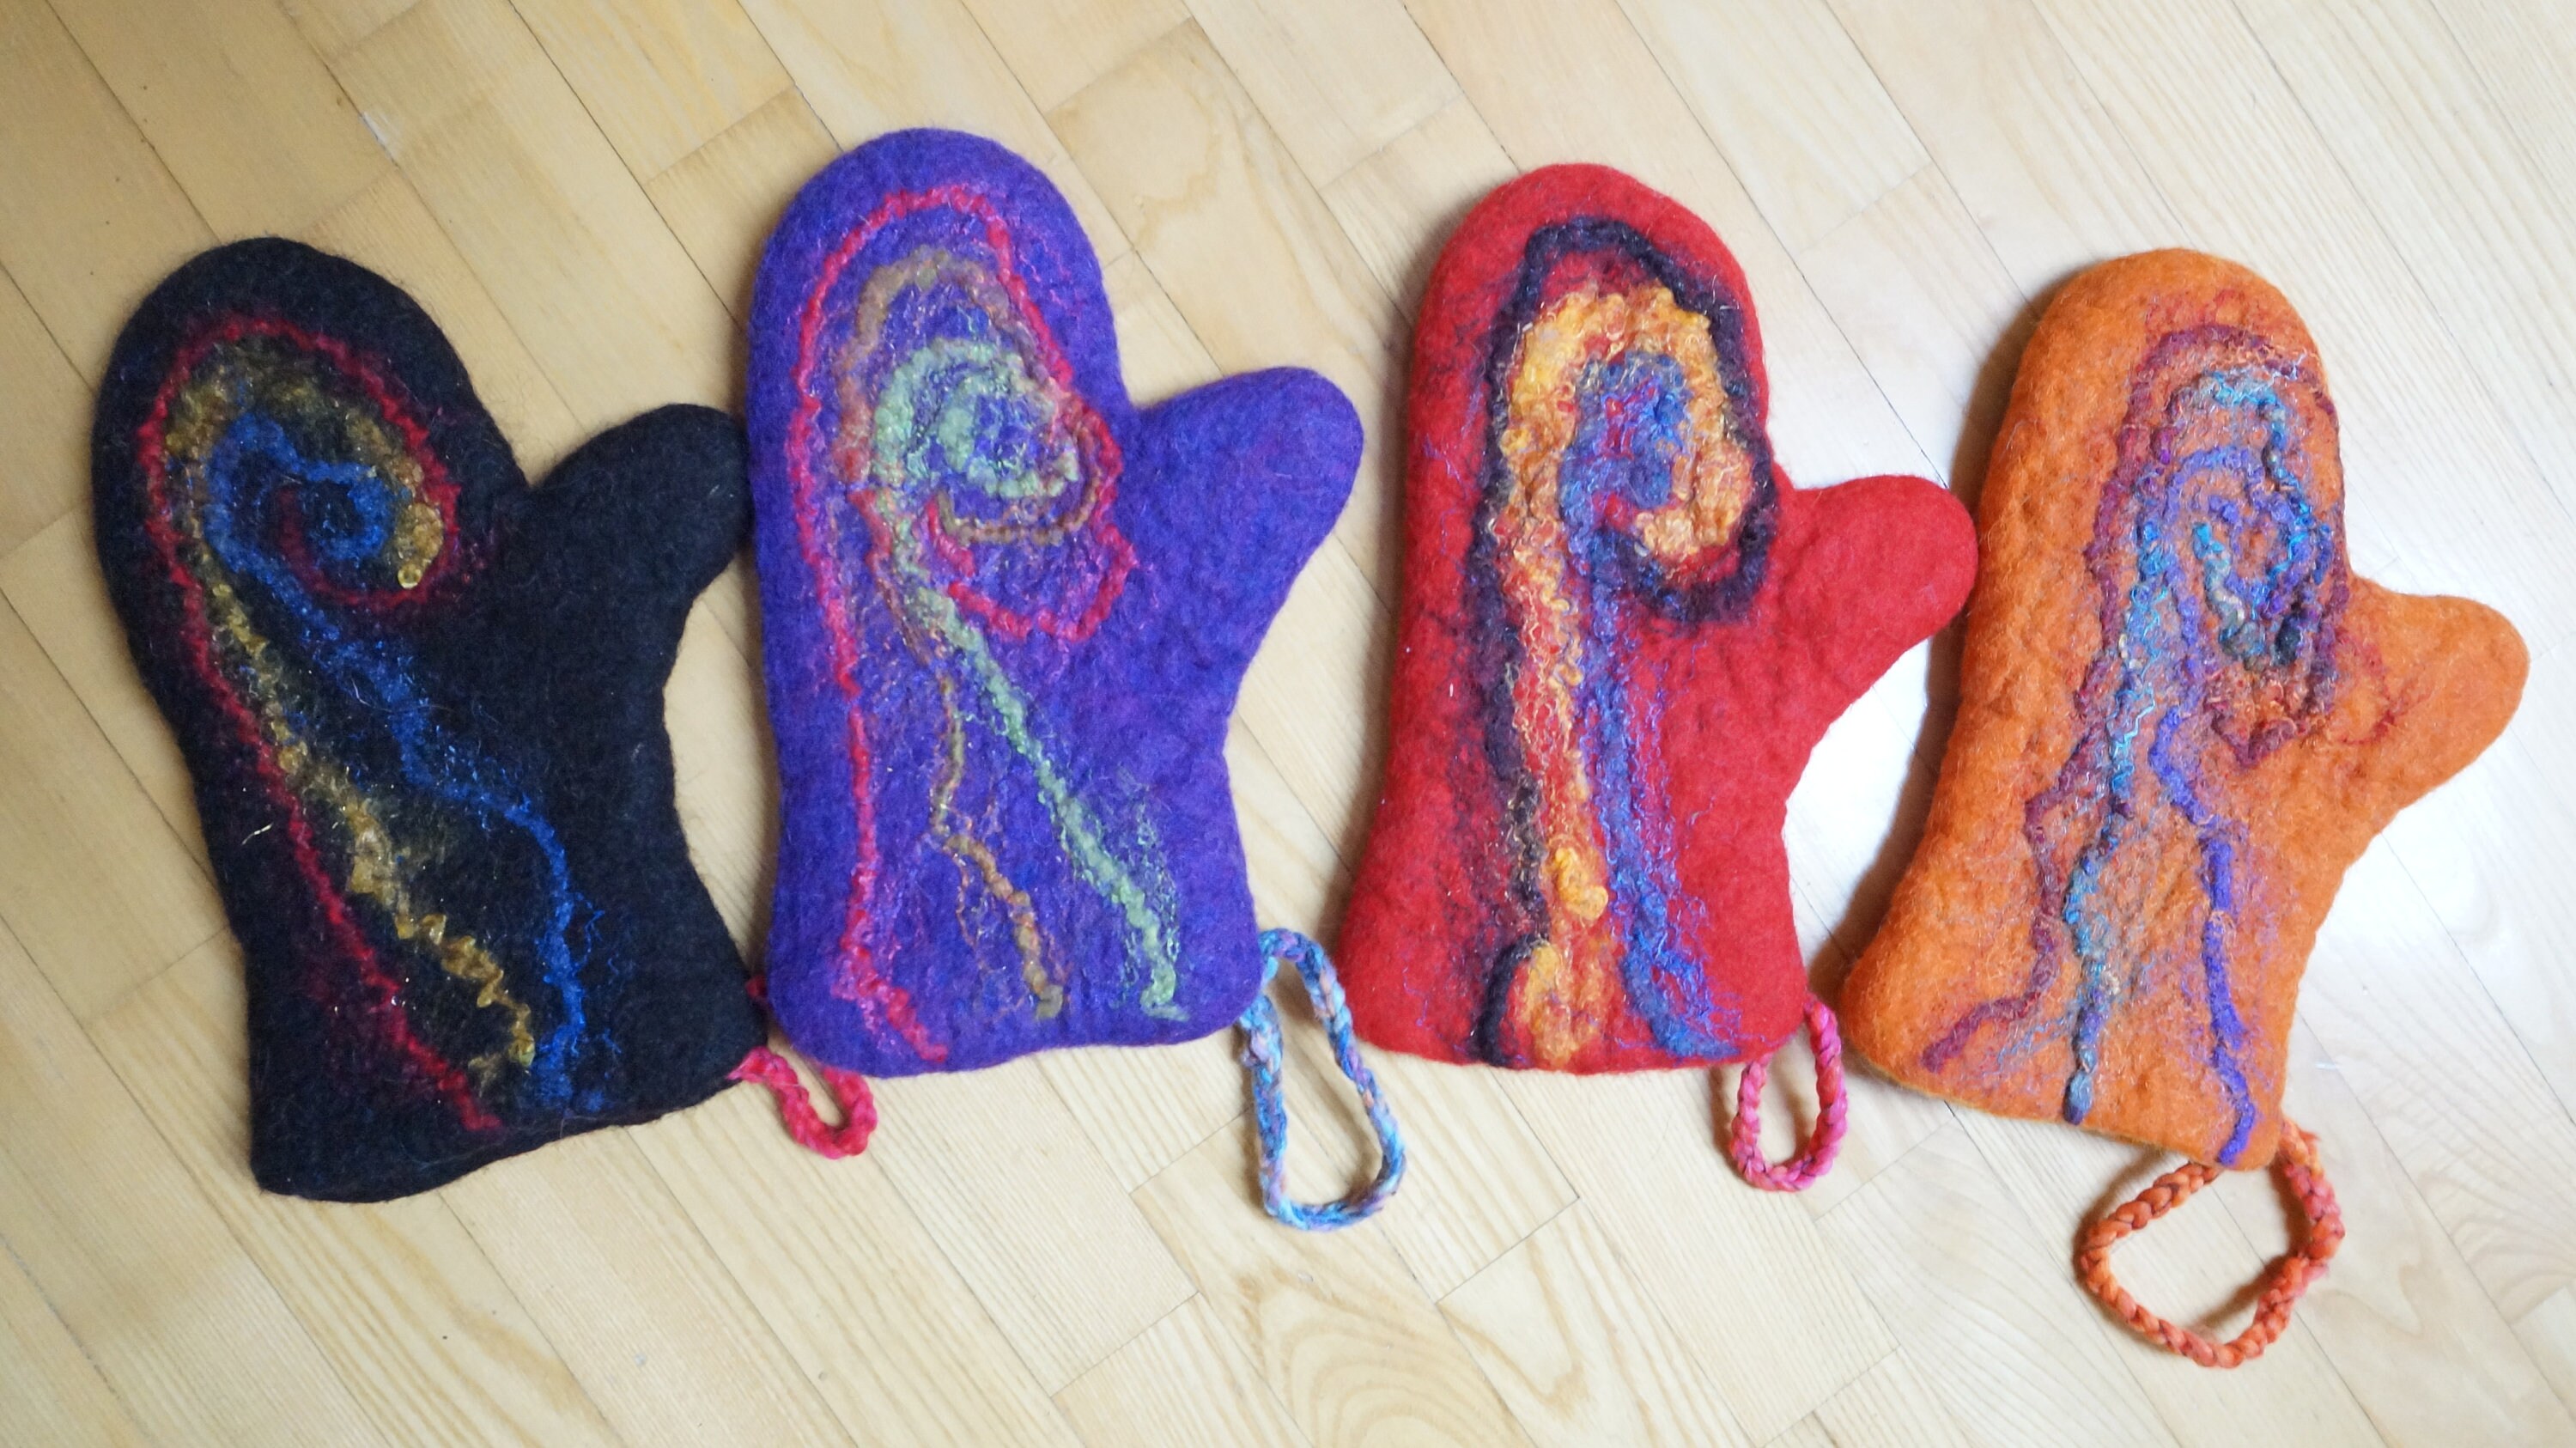 Baking Gift Felted Wool Oven Mittens in Various Colors Felt Pot Holder Oven  Mitt Kitchen Gloves Fathers Day Gift Mothers Day Gift 